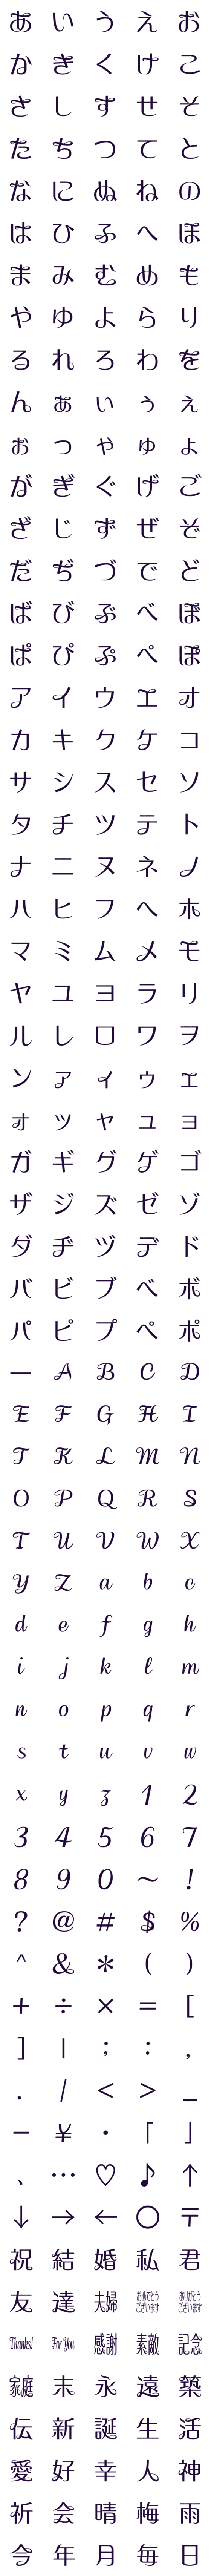 [LINE絵文字]DF欧風花体 フォント絵文字の画像一覧